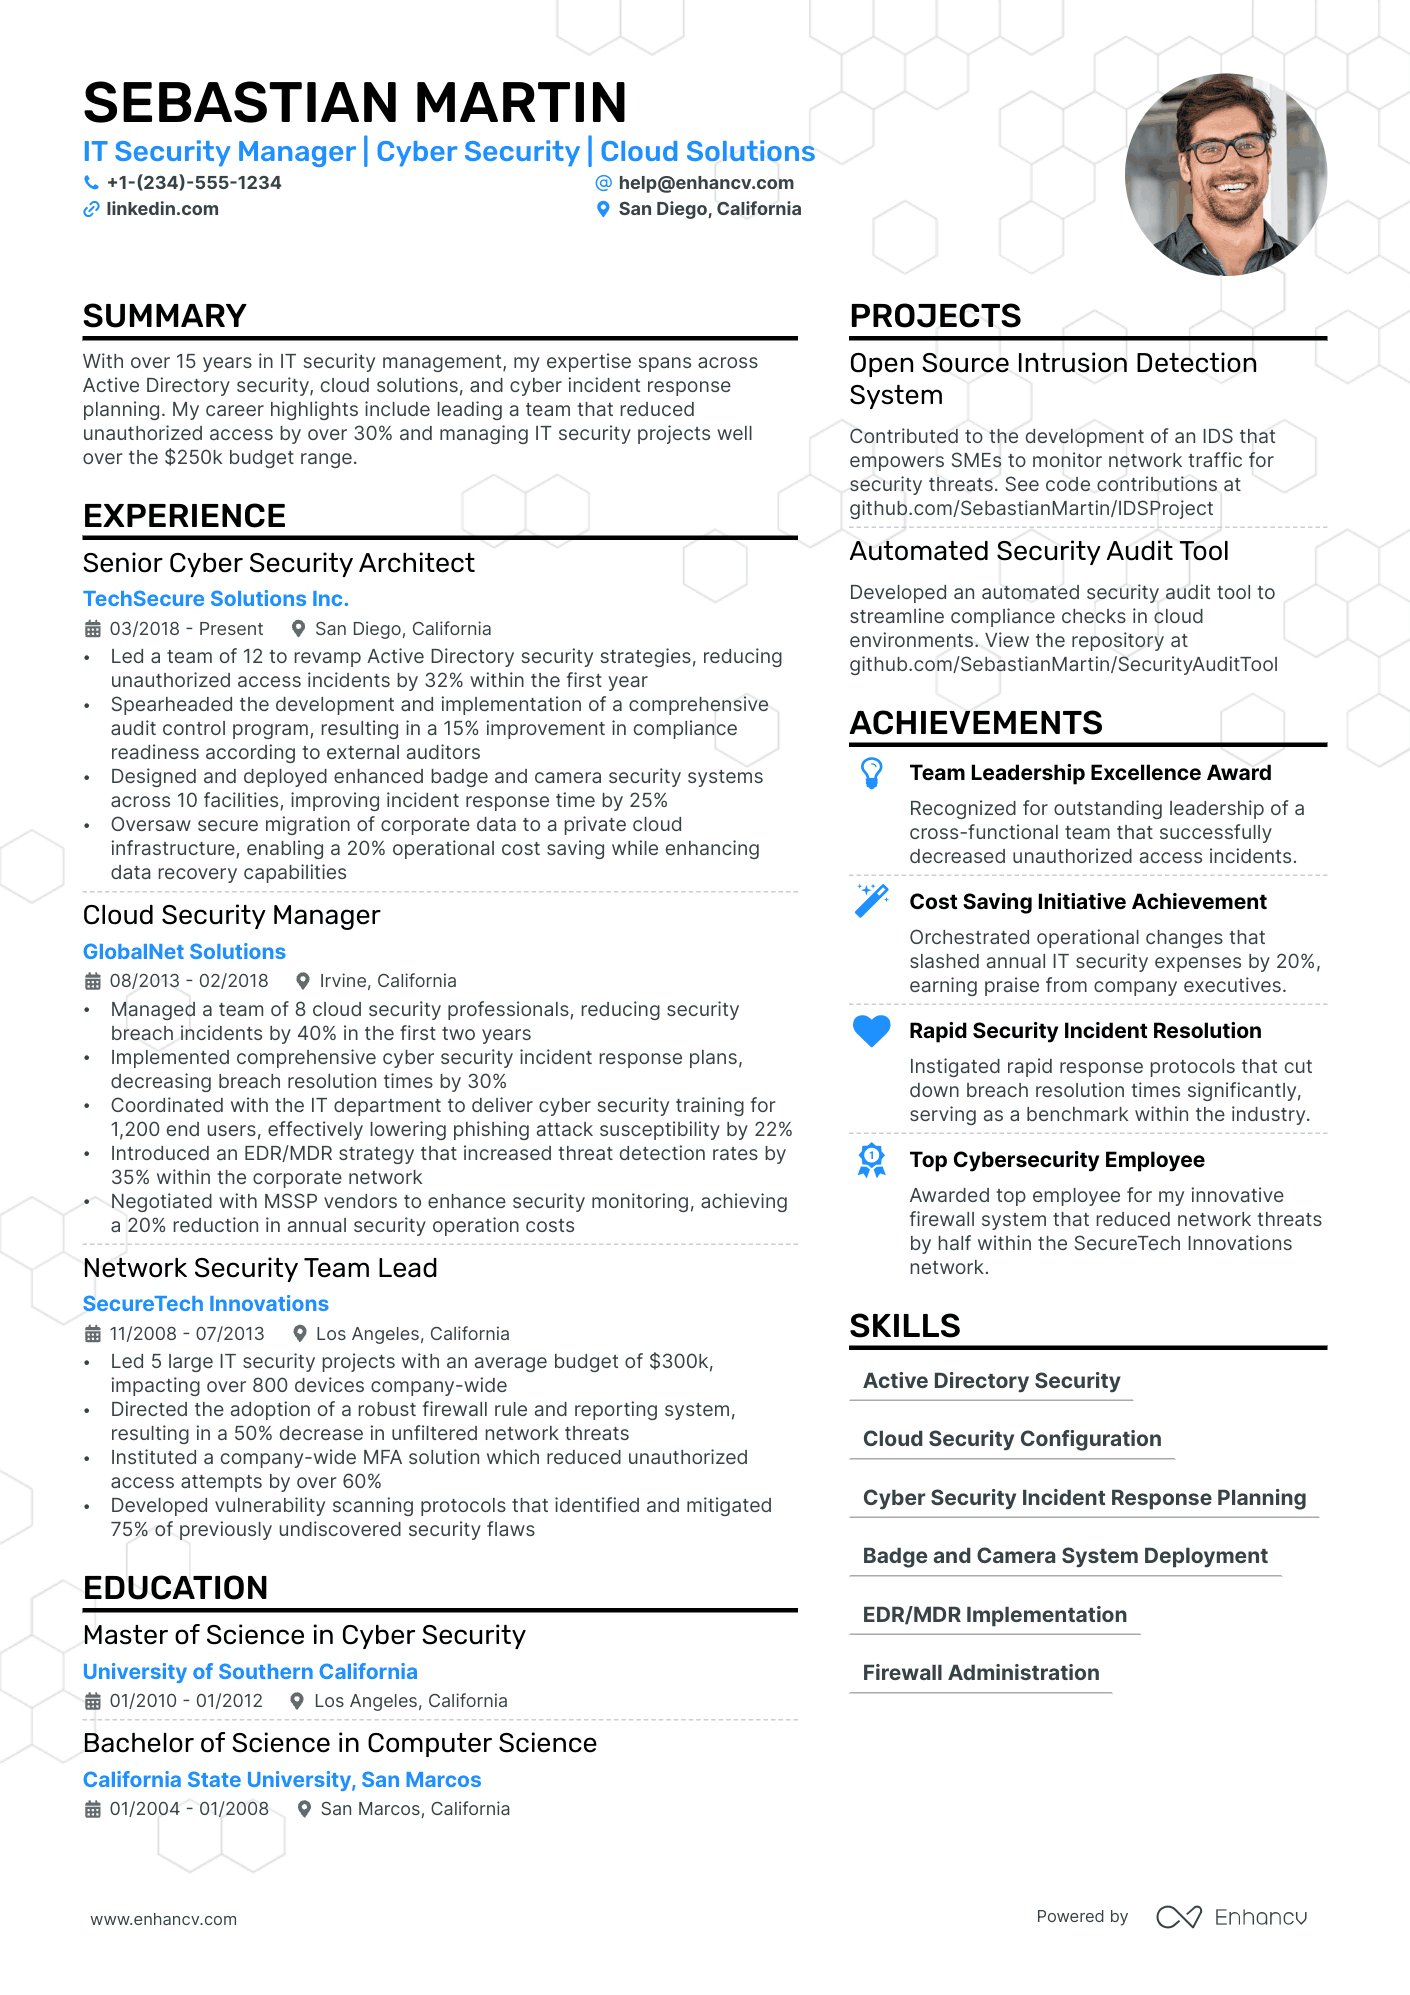 IT Security Manager resume example